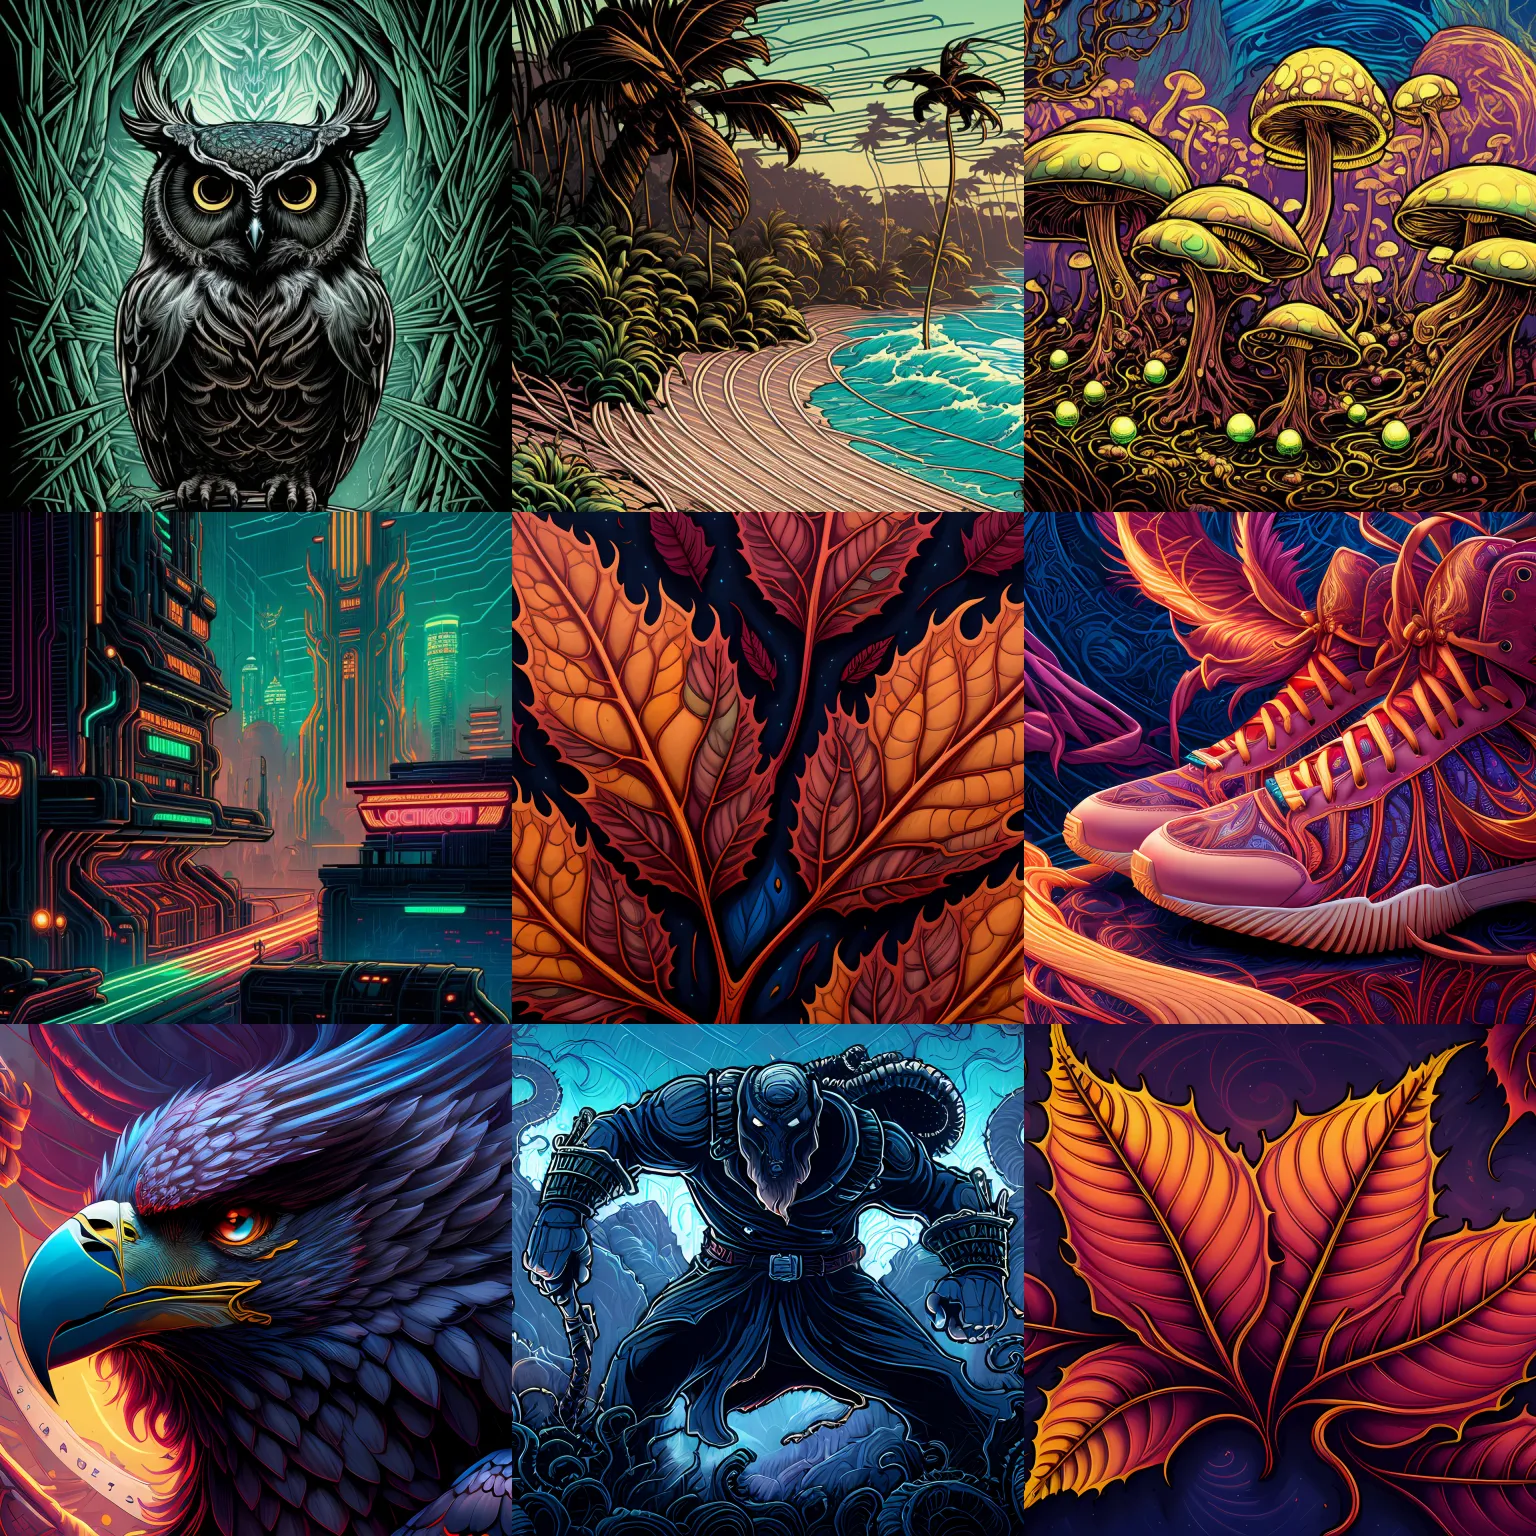 Example of images created using Dan Mumford Style model.